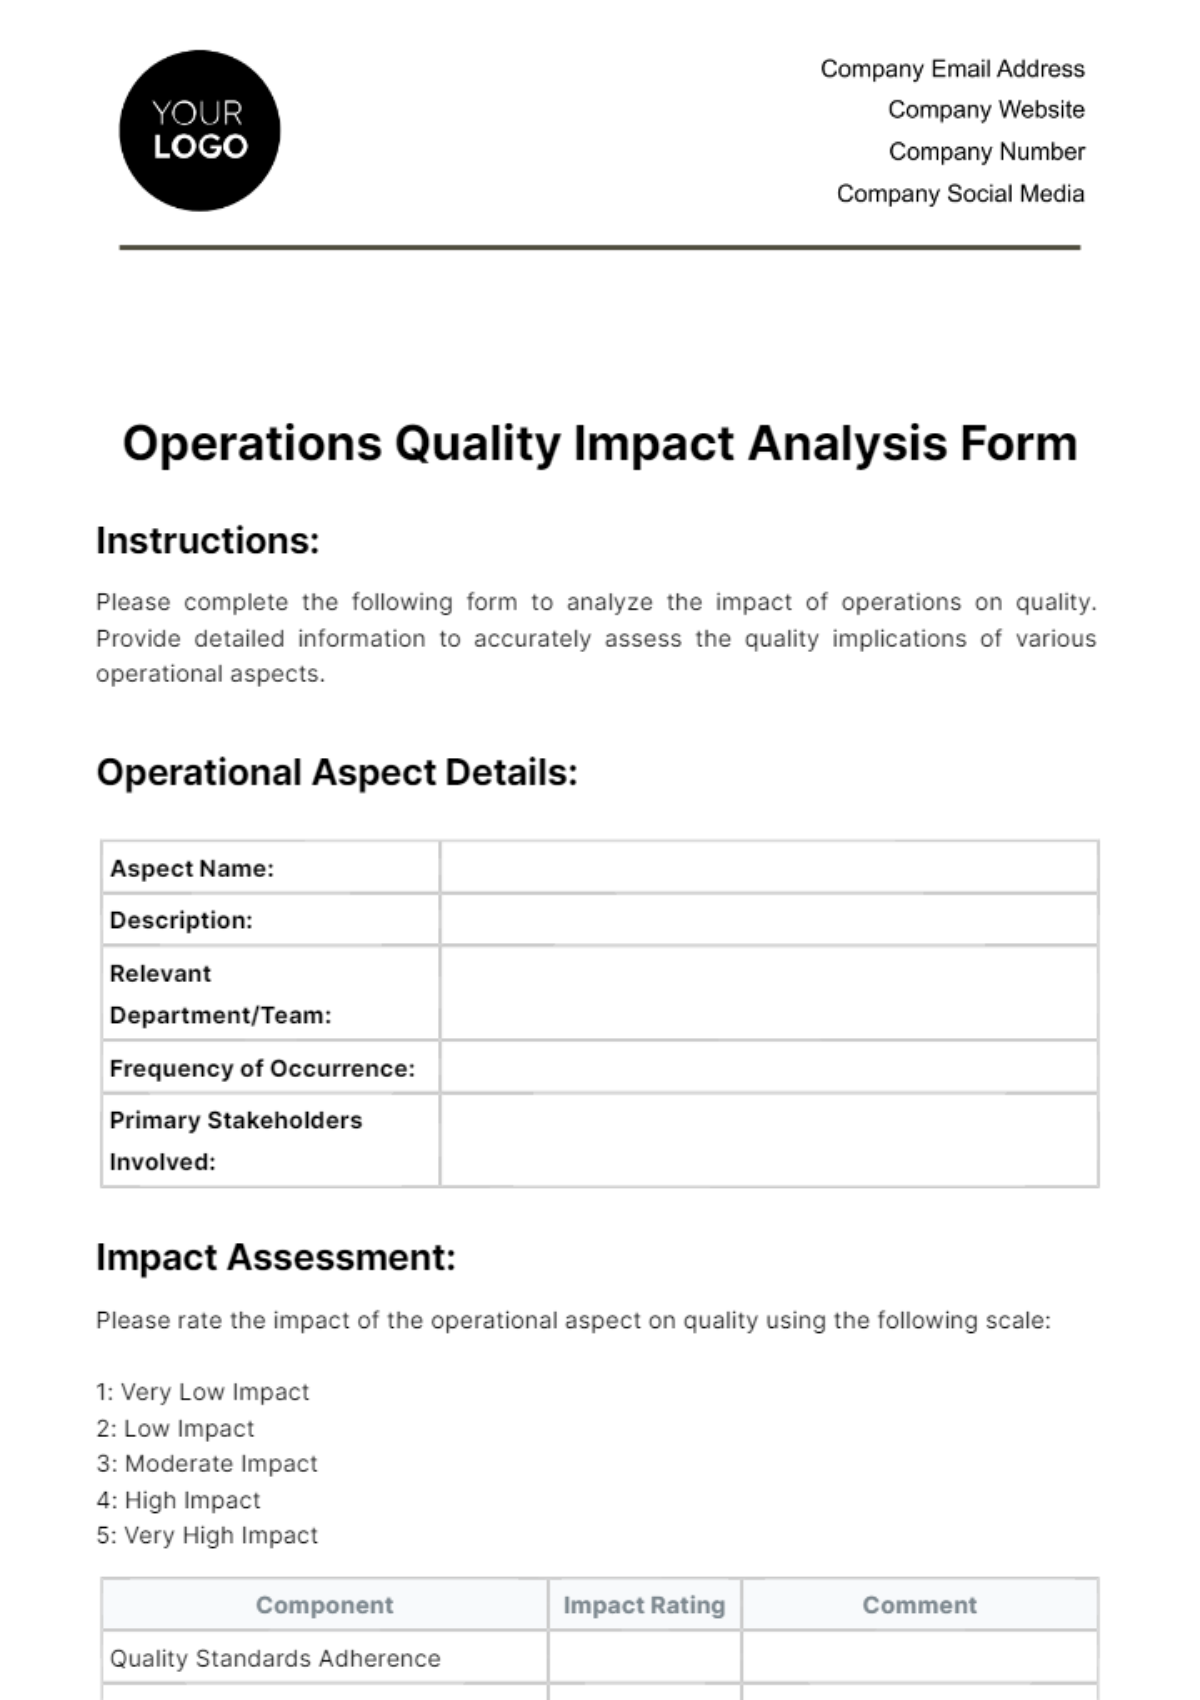 Operations Quality Impact Analysis Form Template